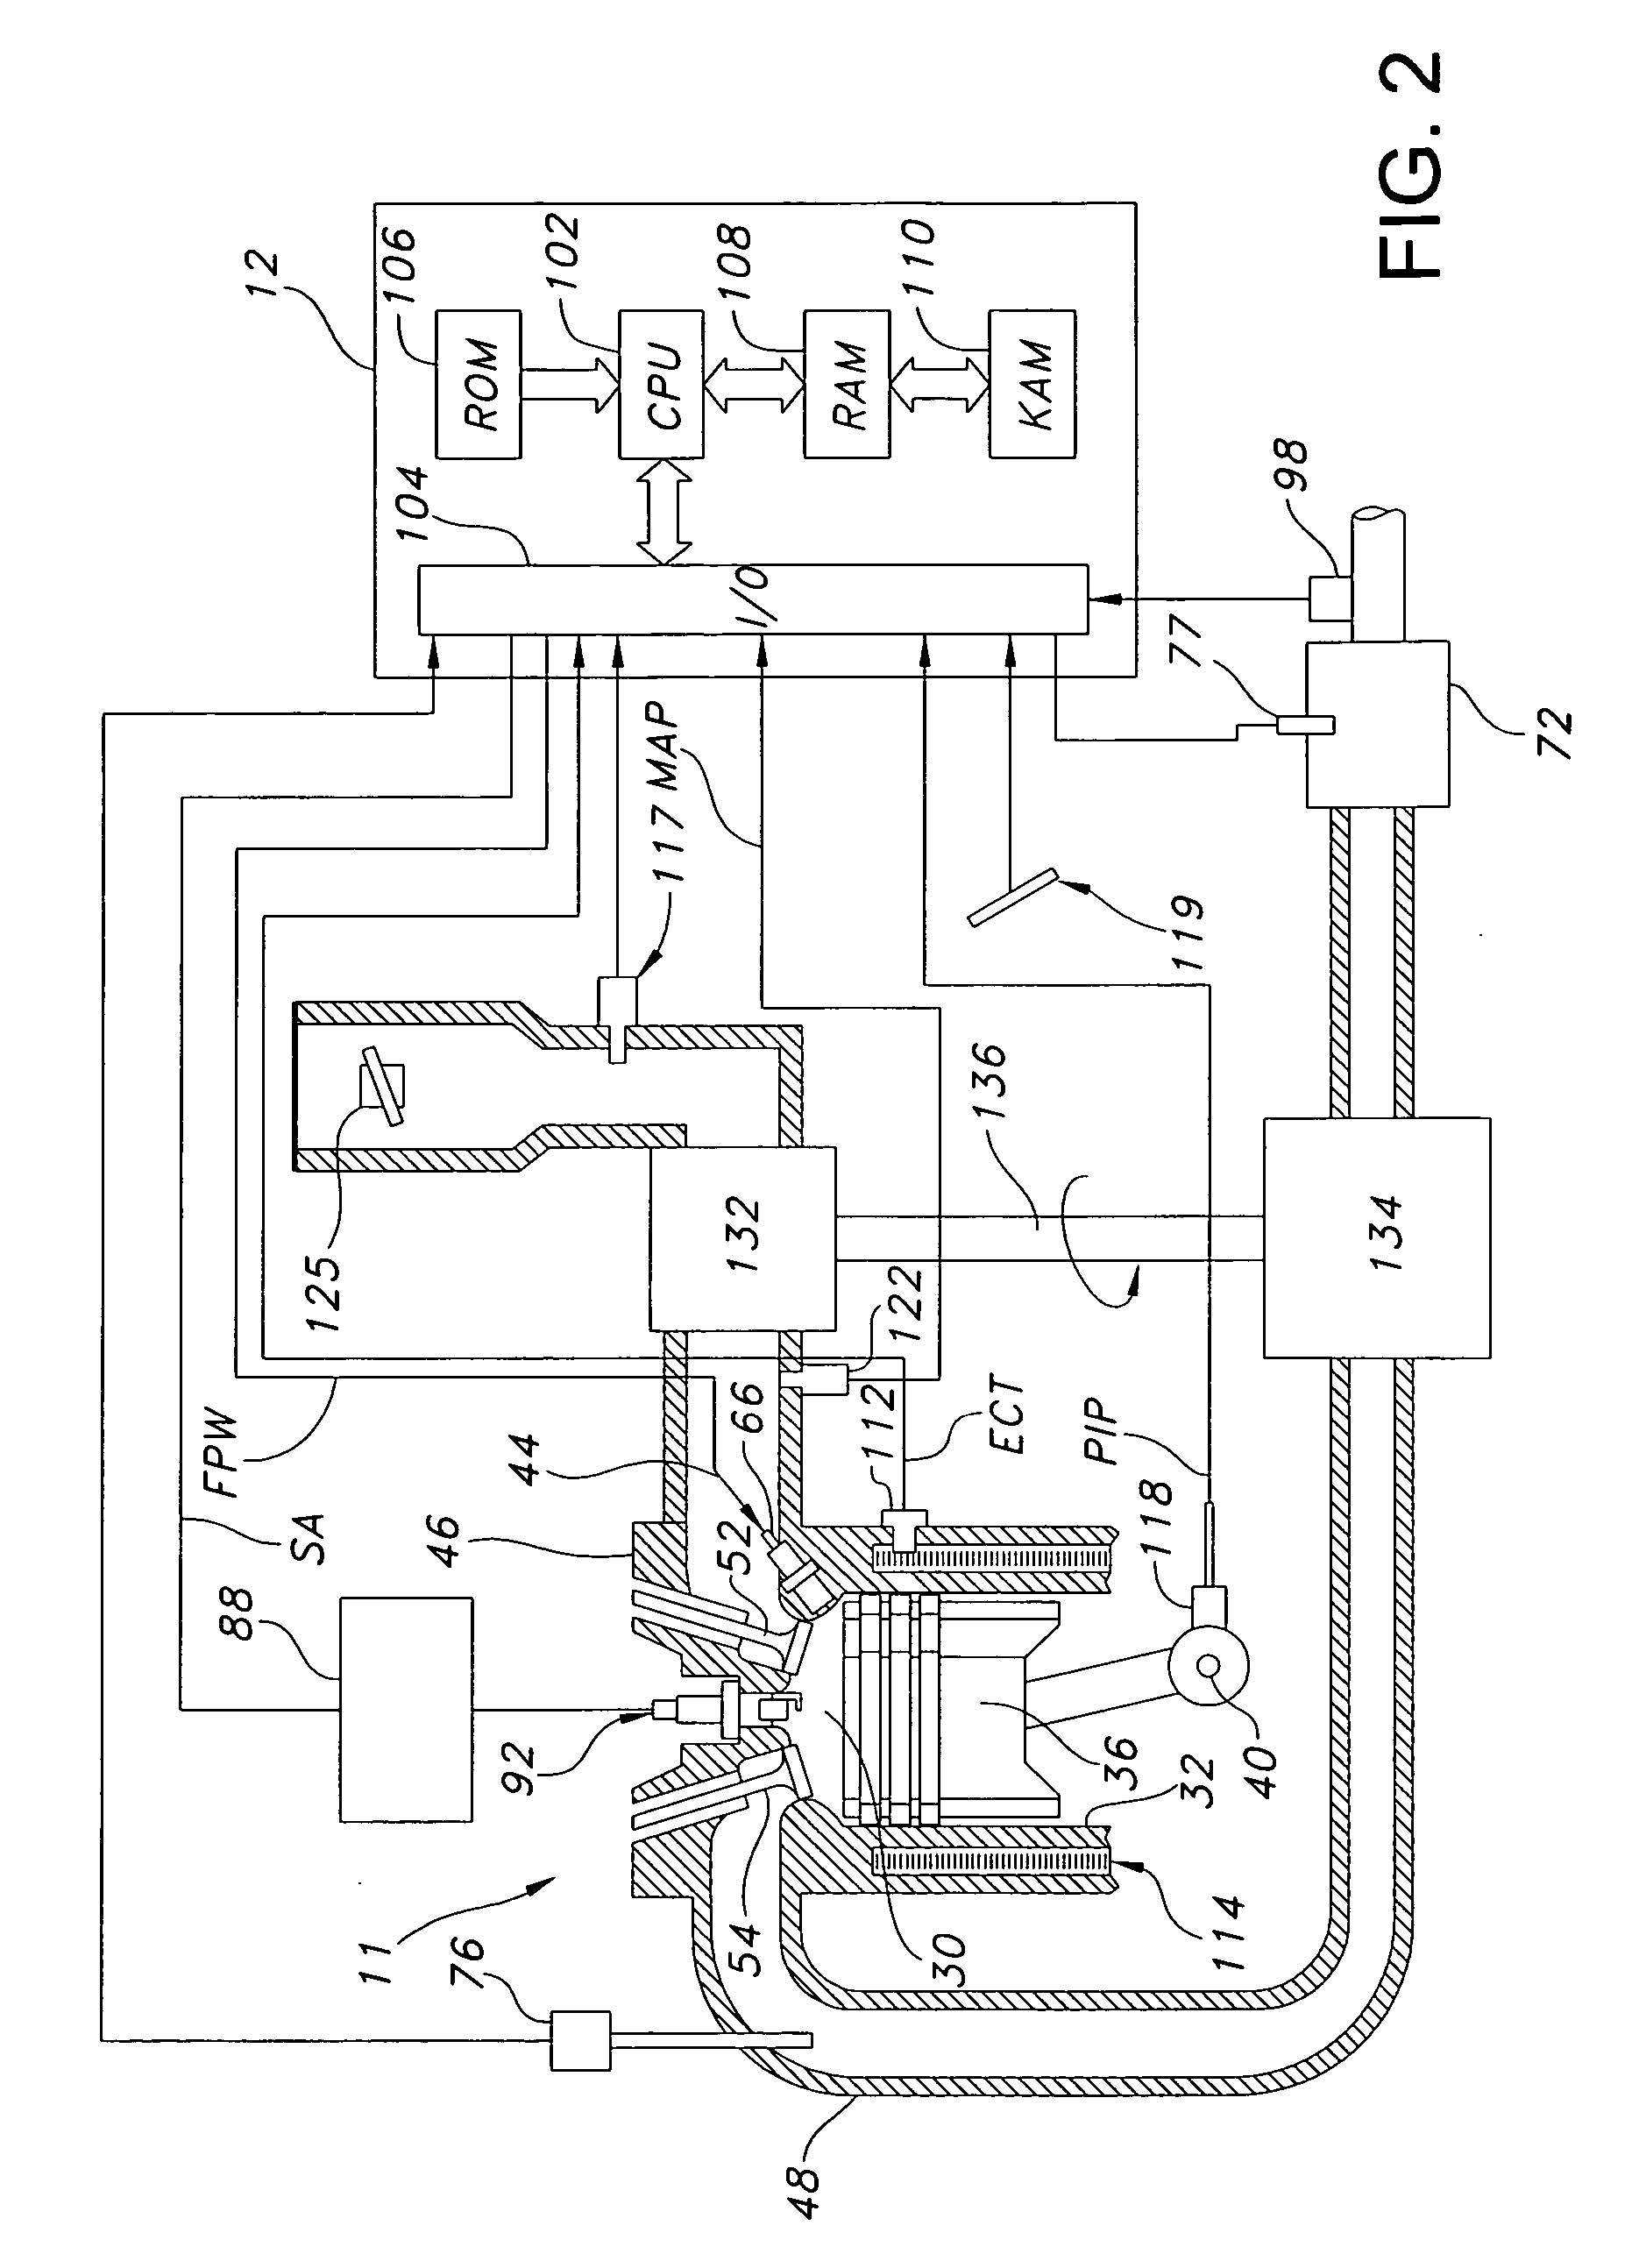 Turbo-lag compensation system for an engine